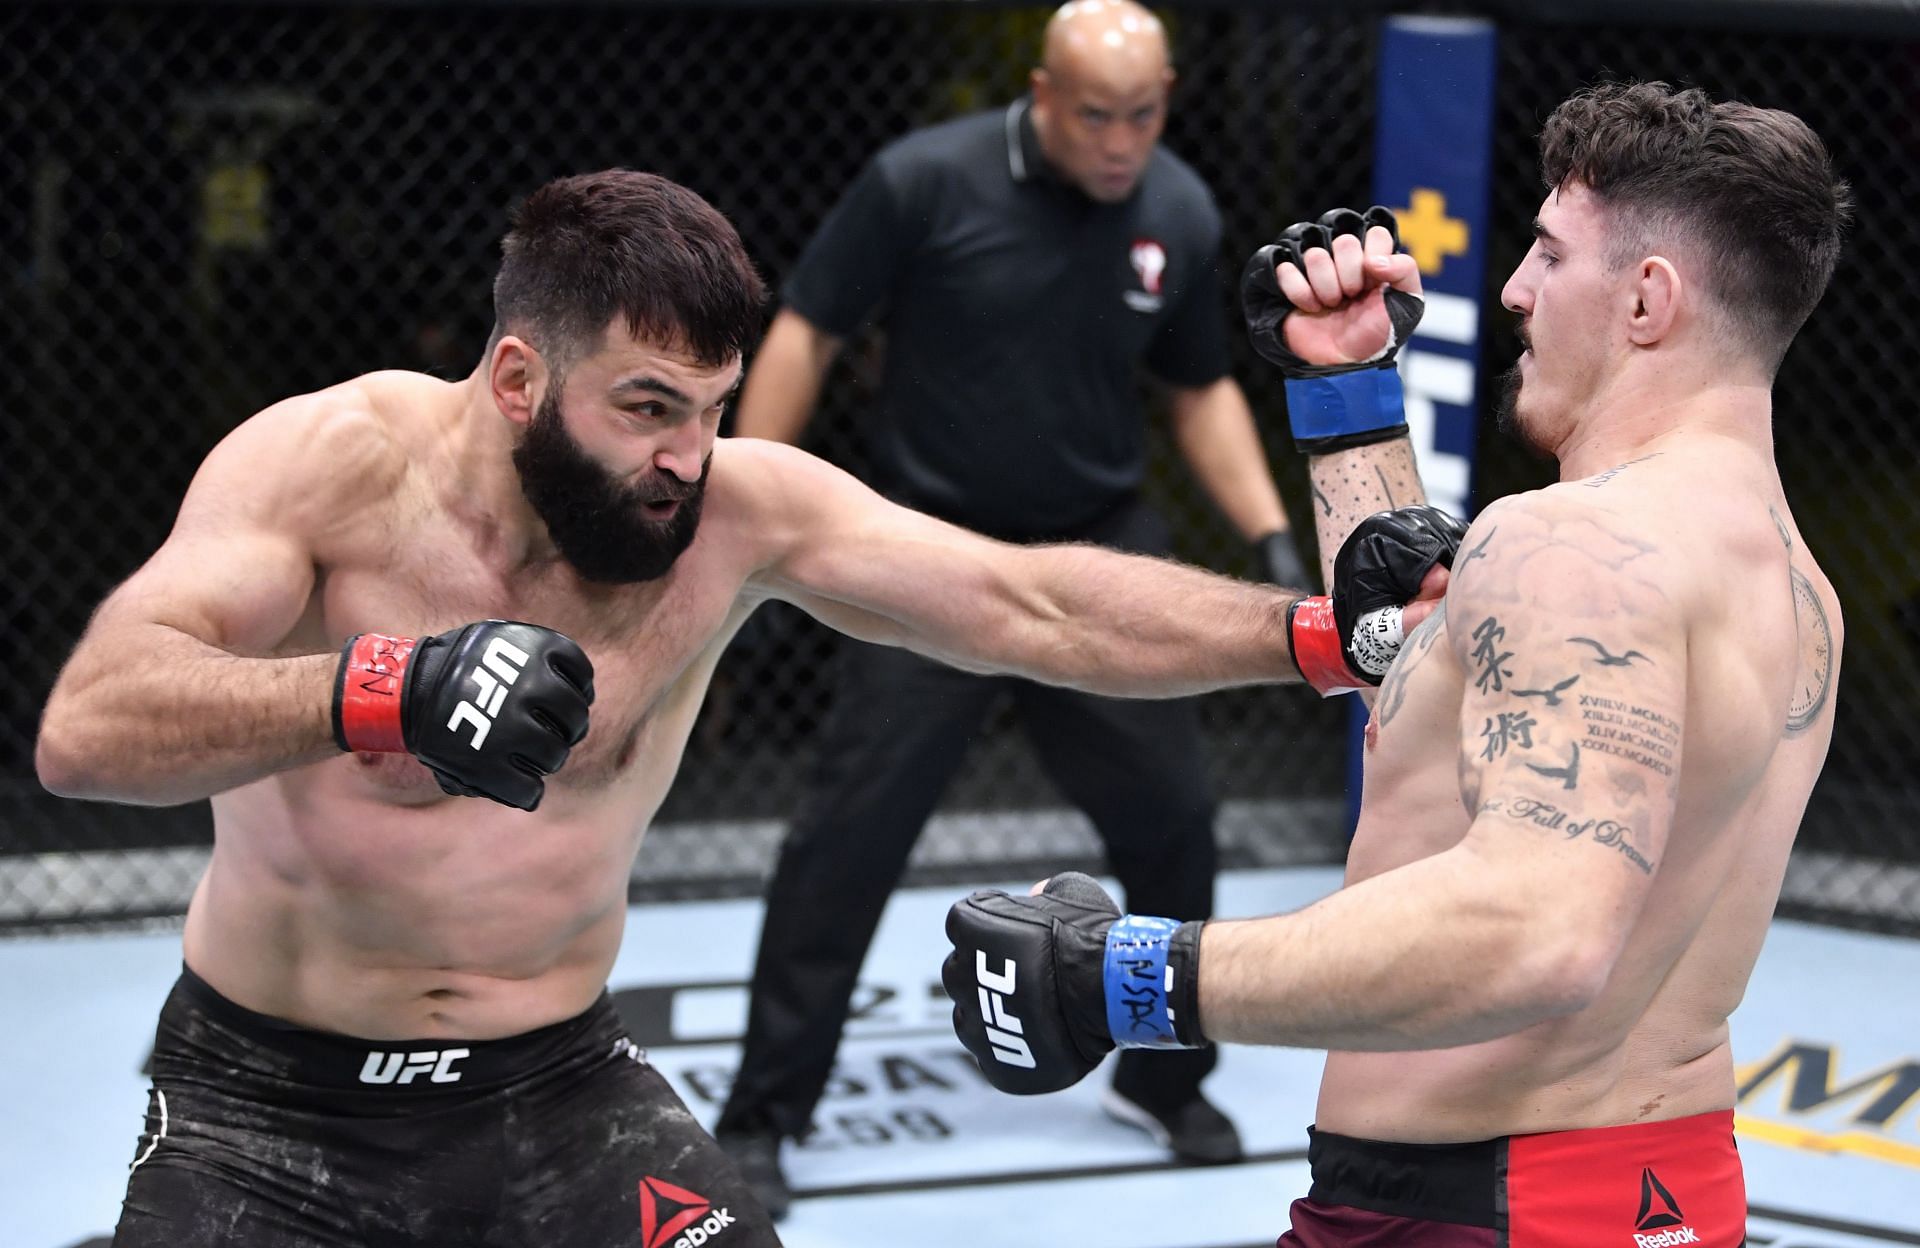 Andrei Arlovski is somehow still competing at the top at the age of 44